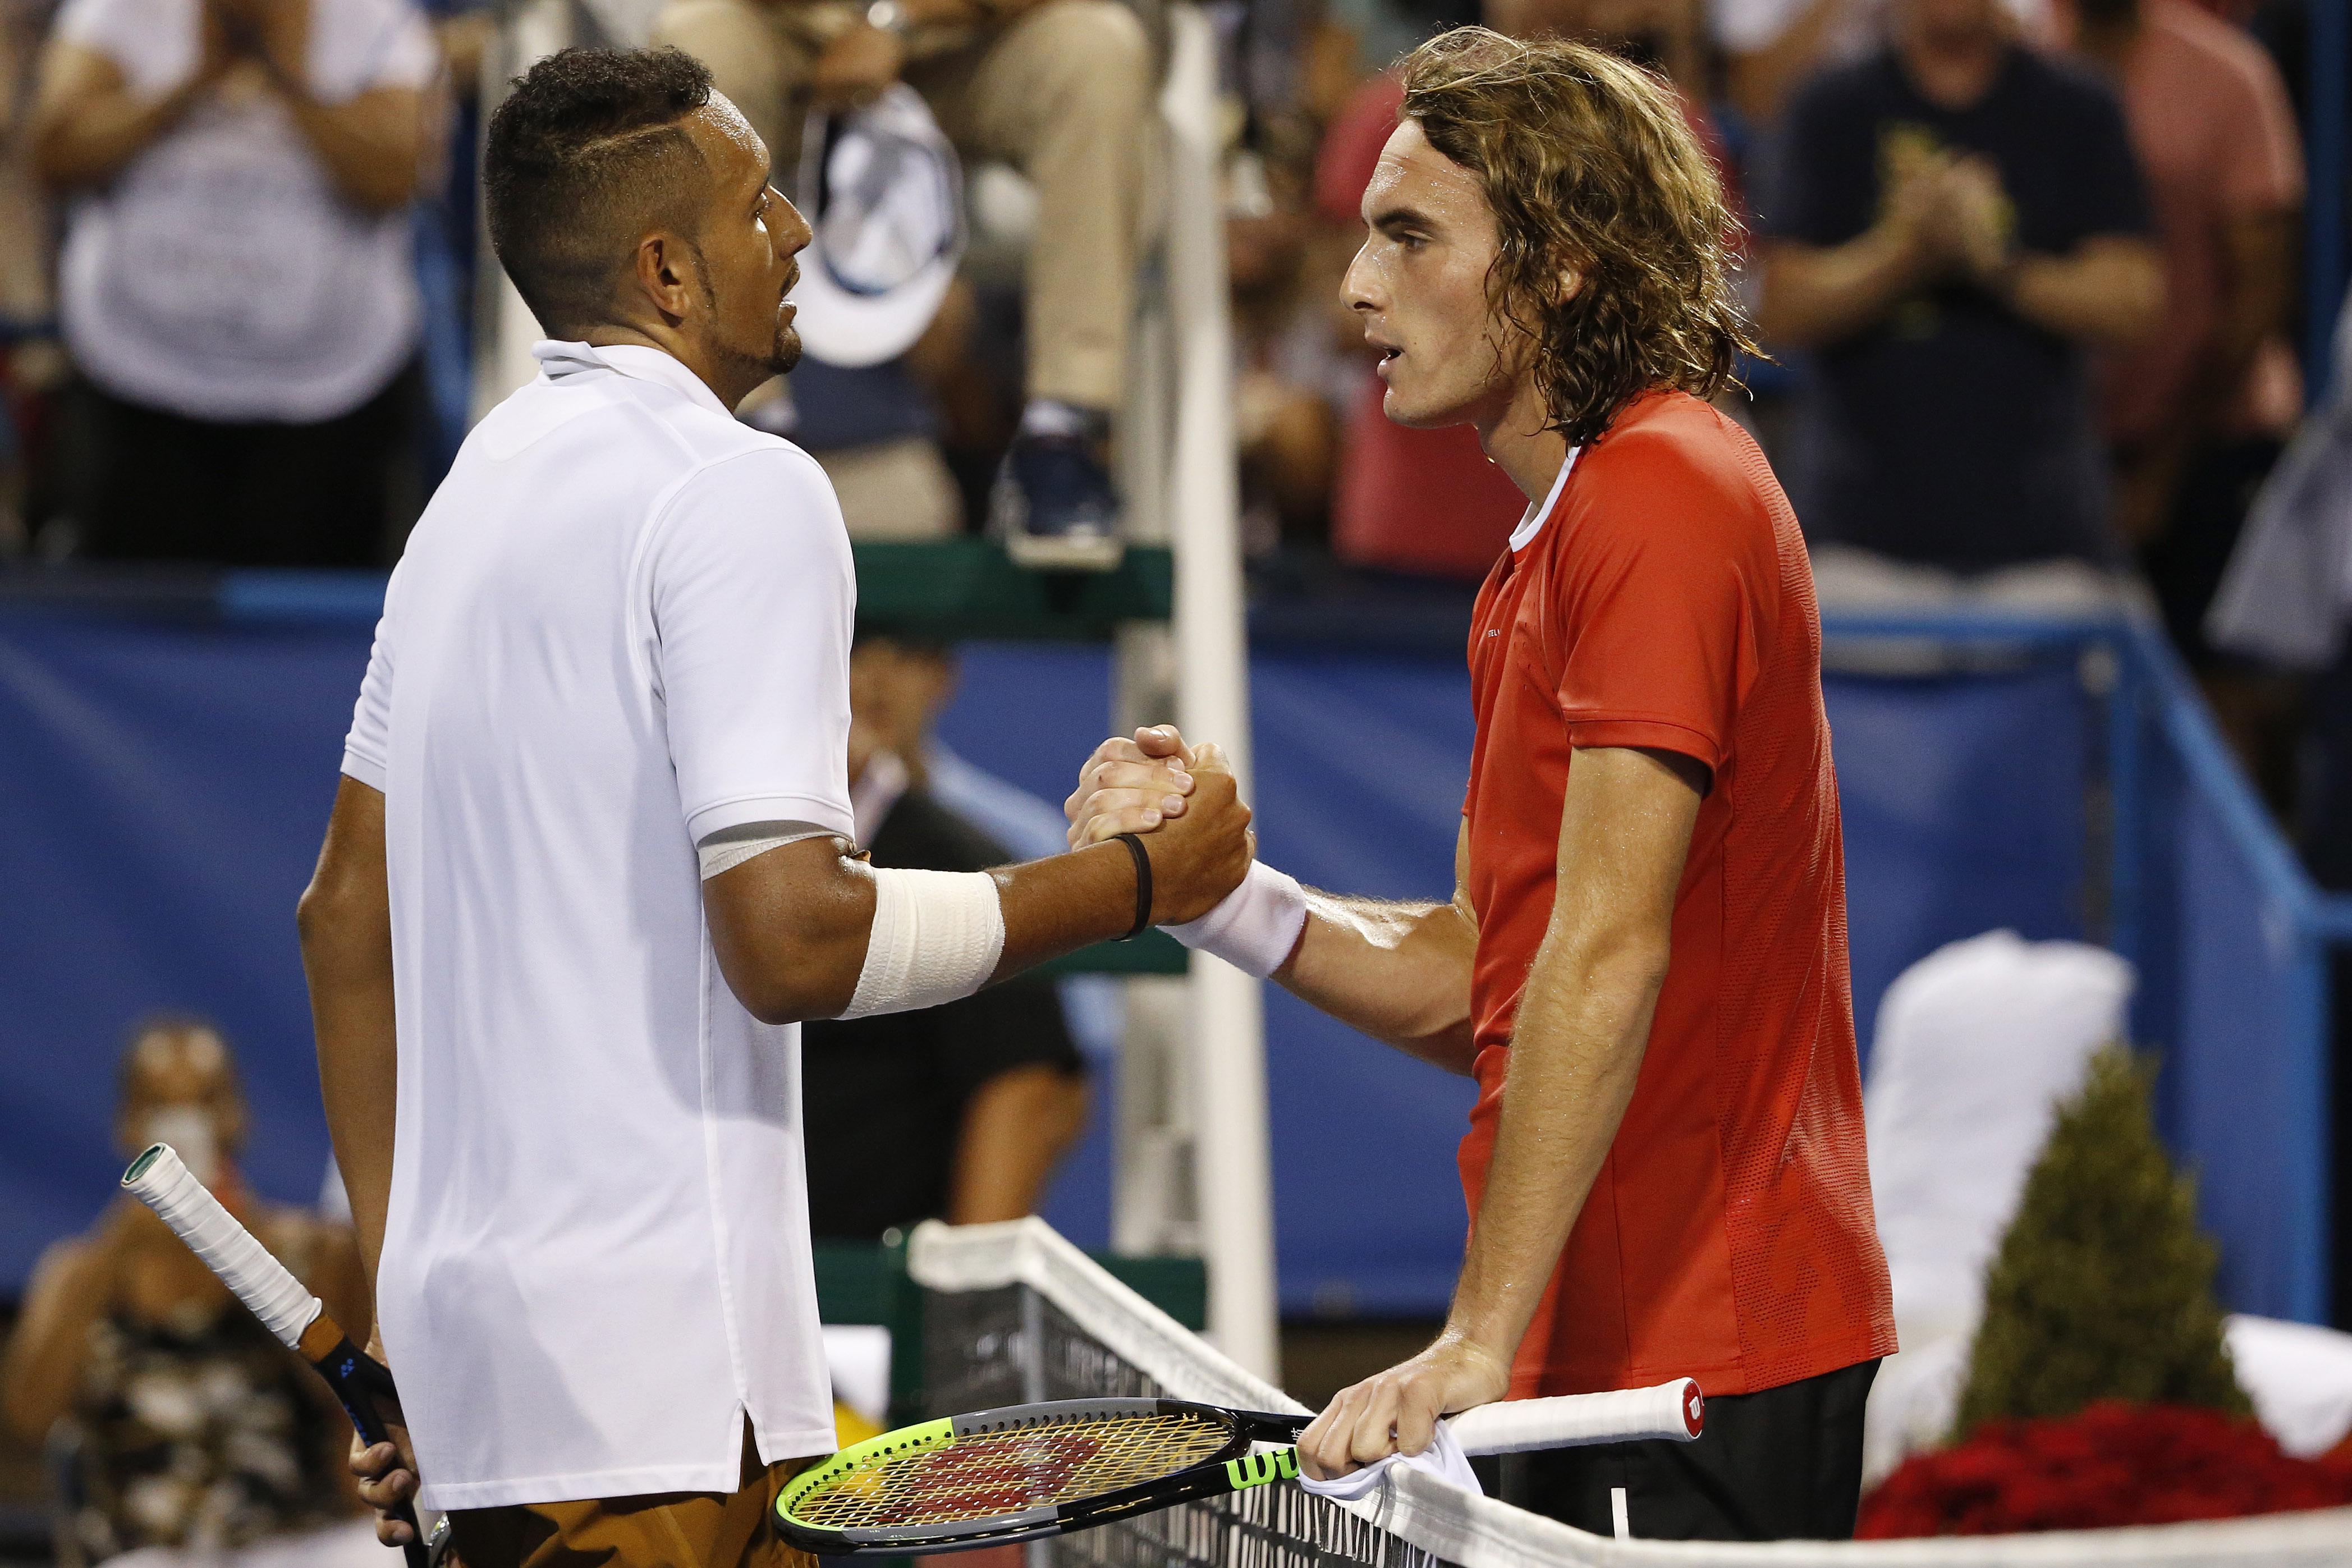 Stefanos Tsitsipas vs Nick Kyrgios Odds, Prediction and Betting Trends for Wimbledon Men's Round 3 Match